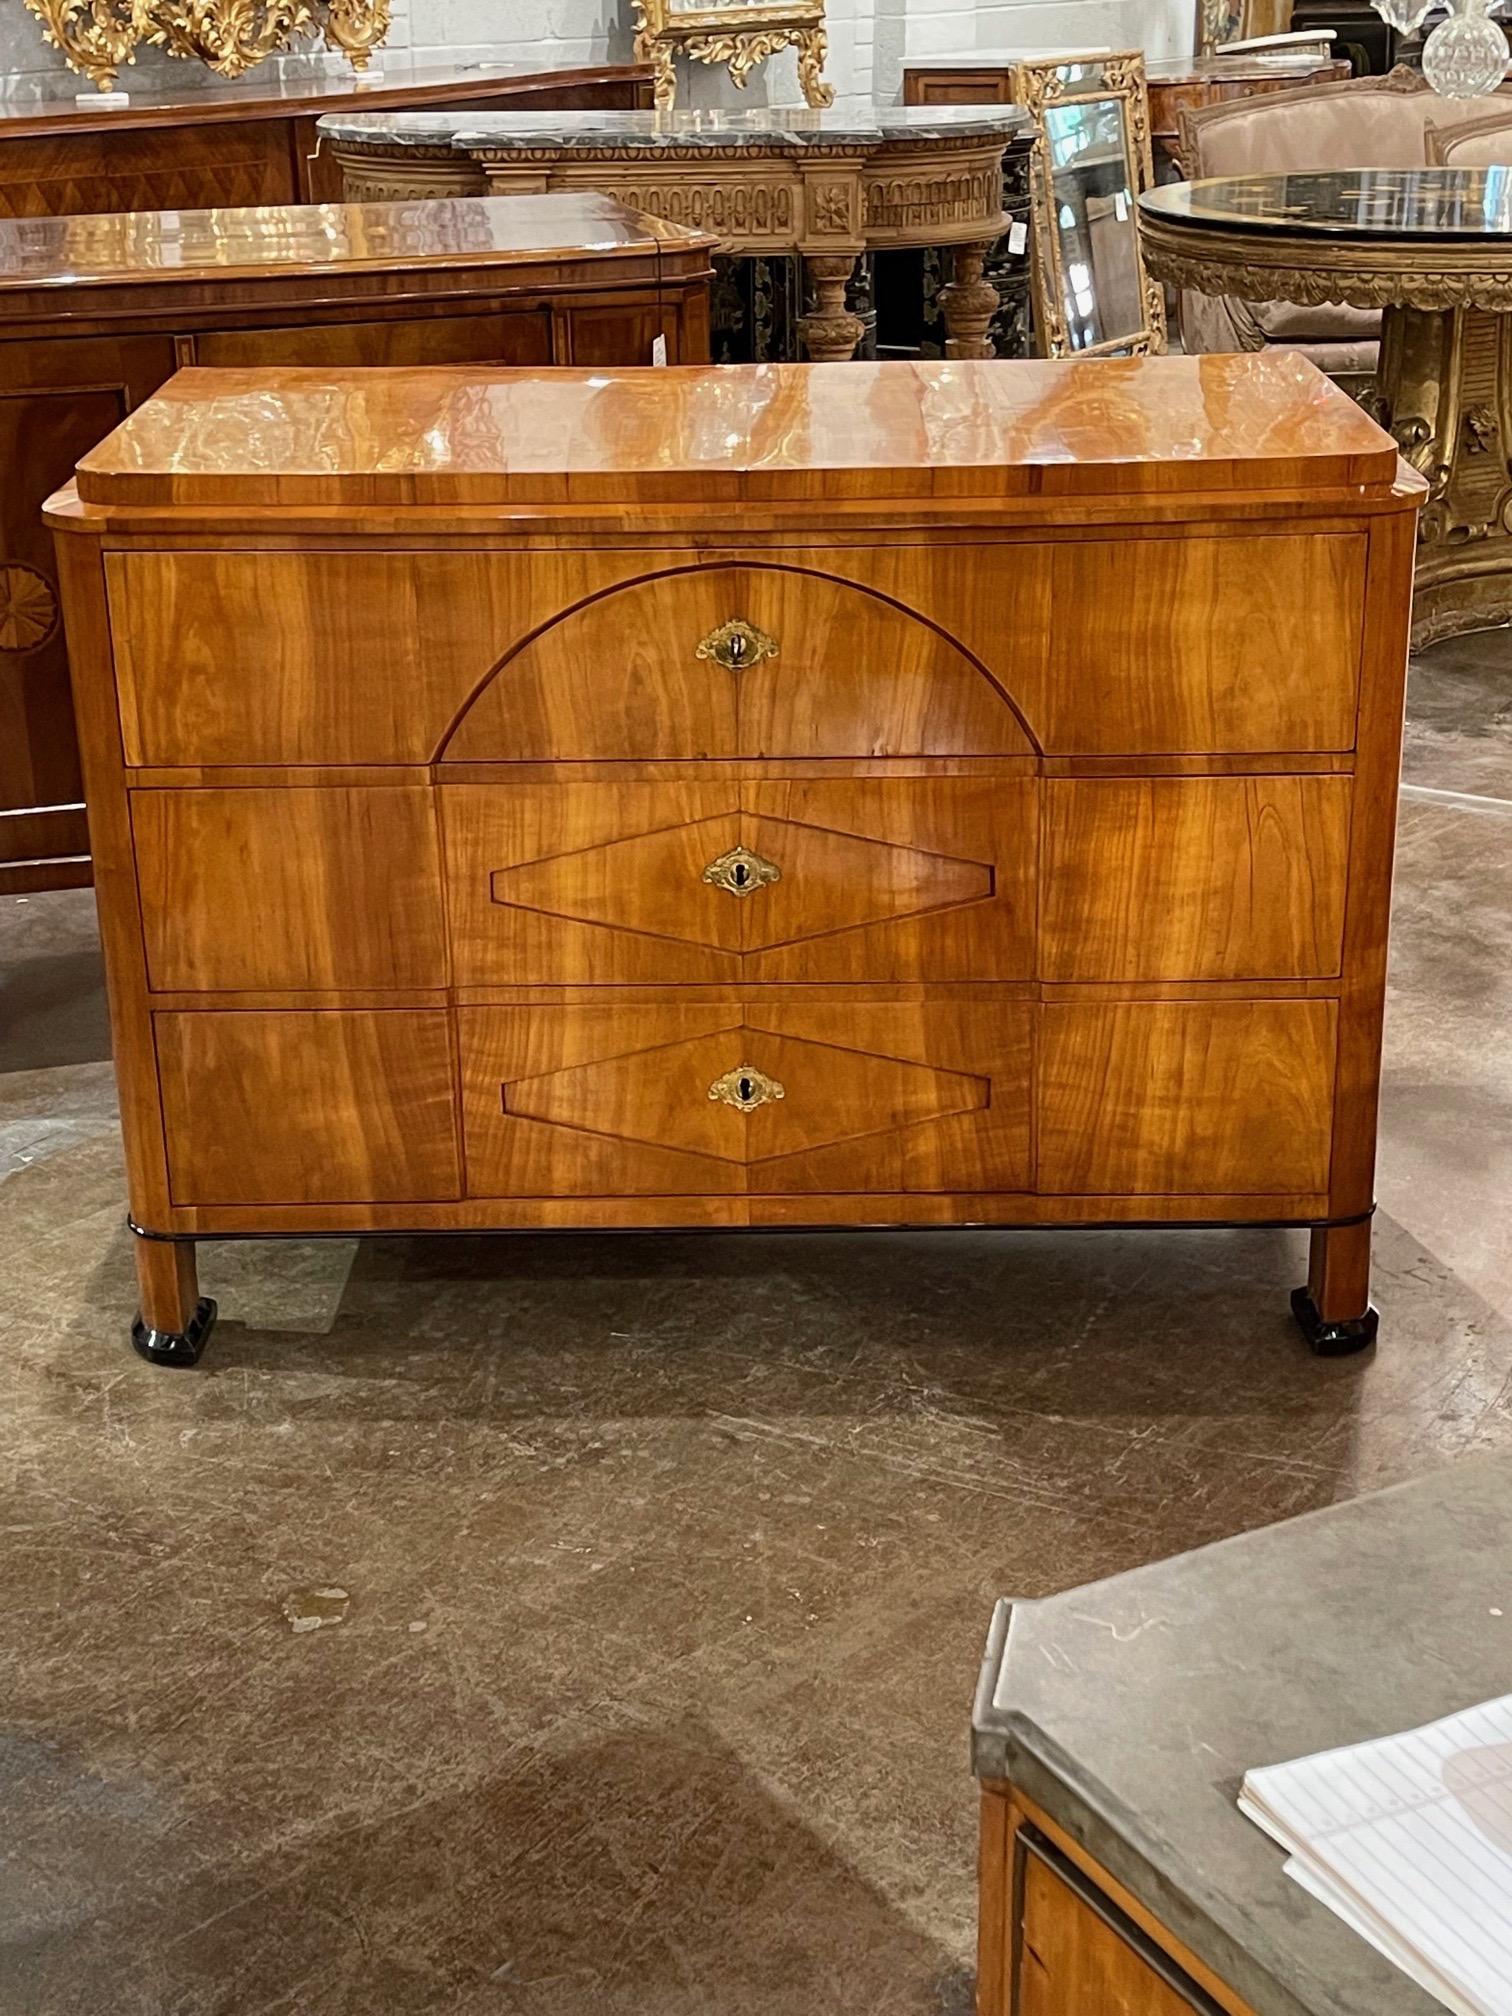 Outstanding Austrian Biedermeier classical style walnut commode. Beautiful polished wood along with superb quality and craftsmanship. Stunning!!